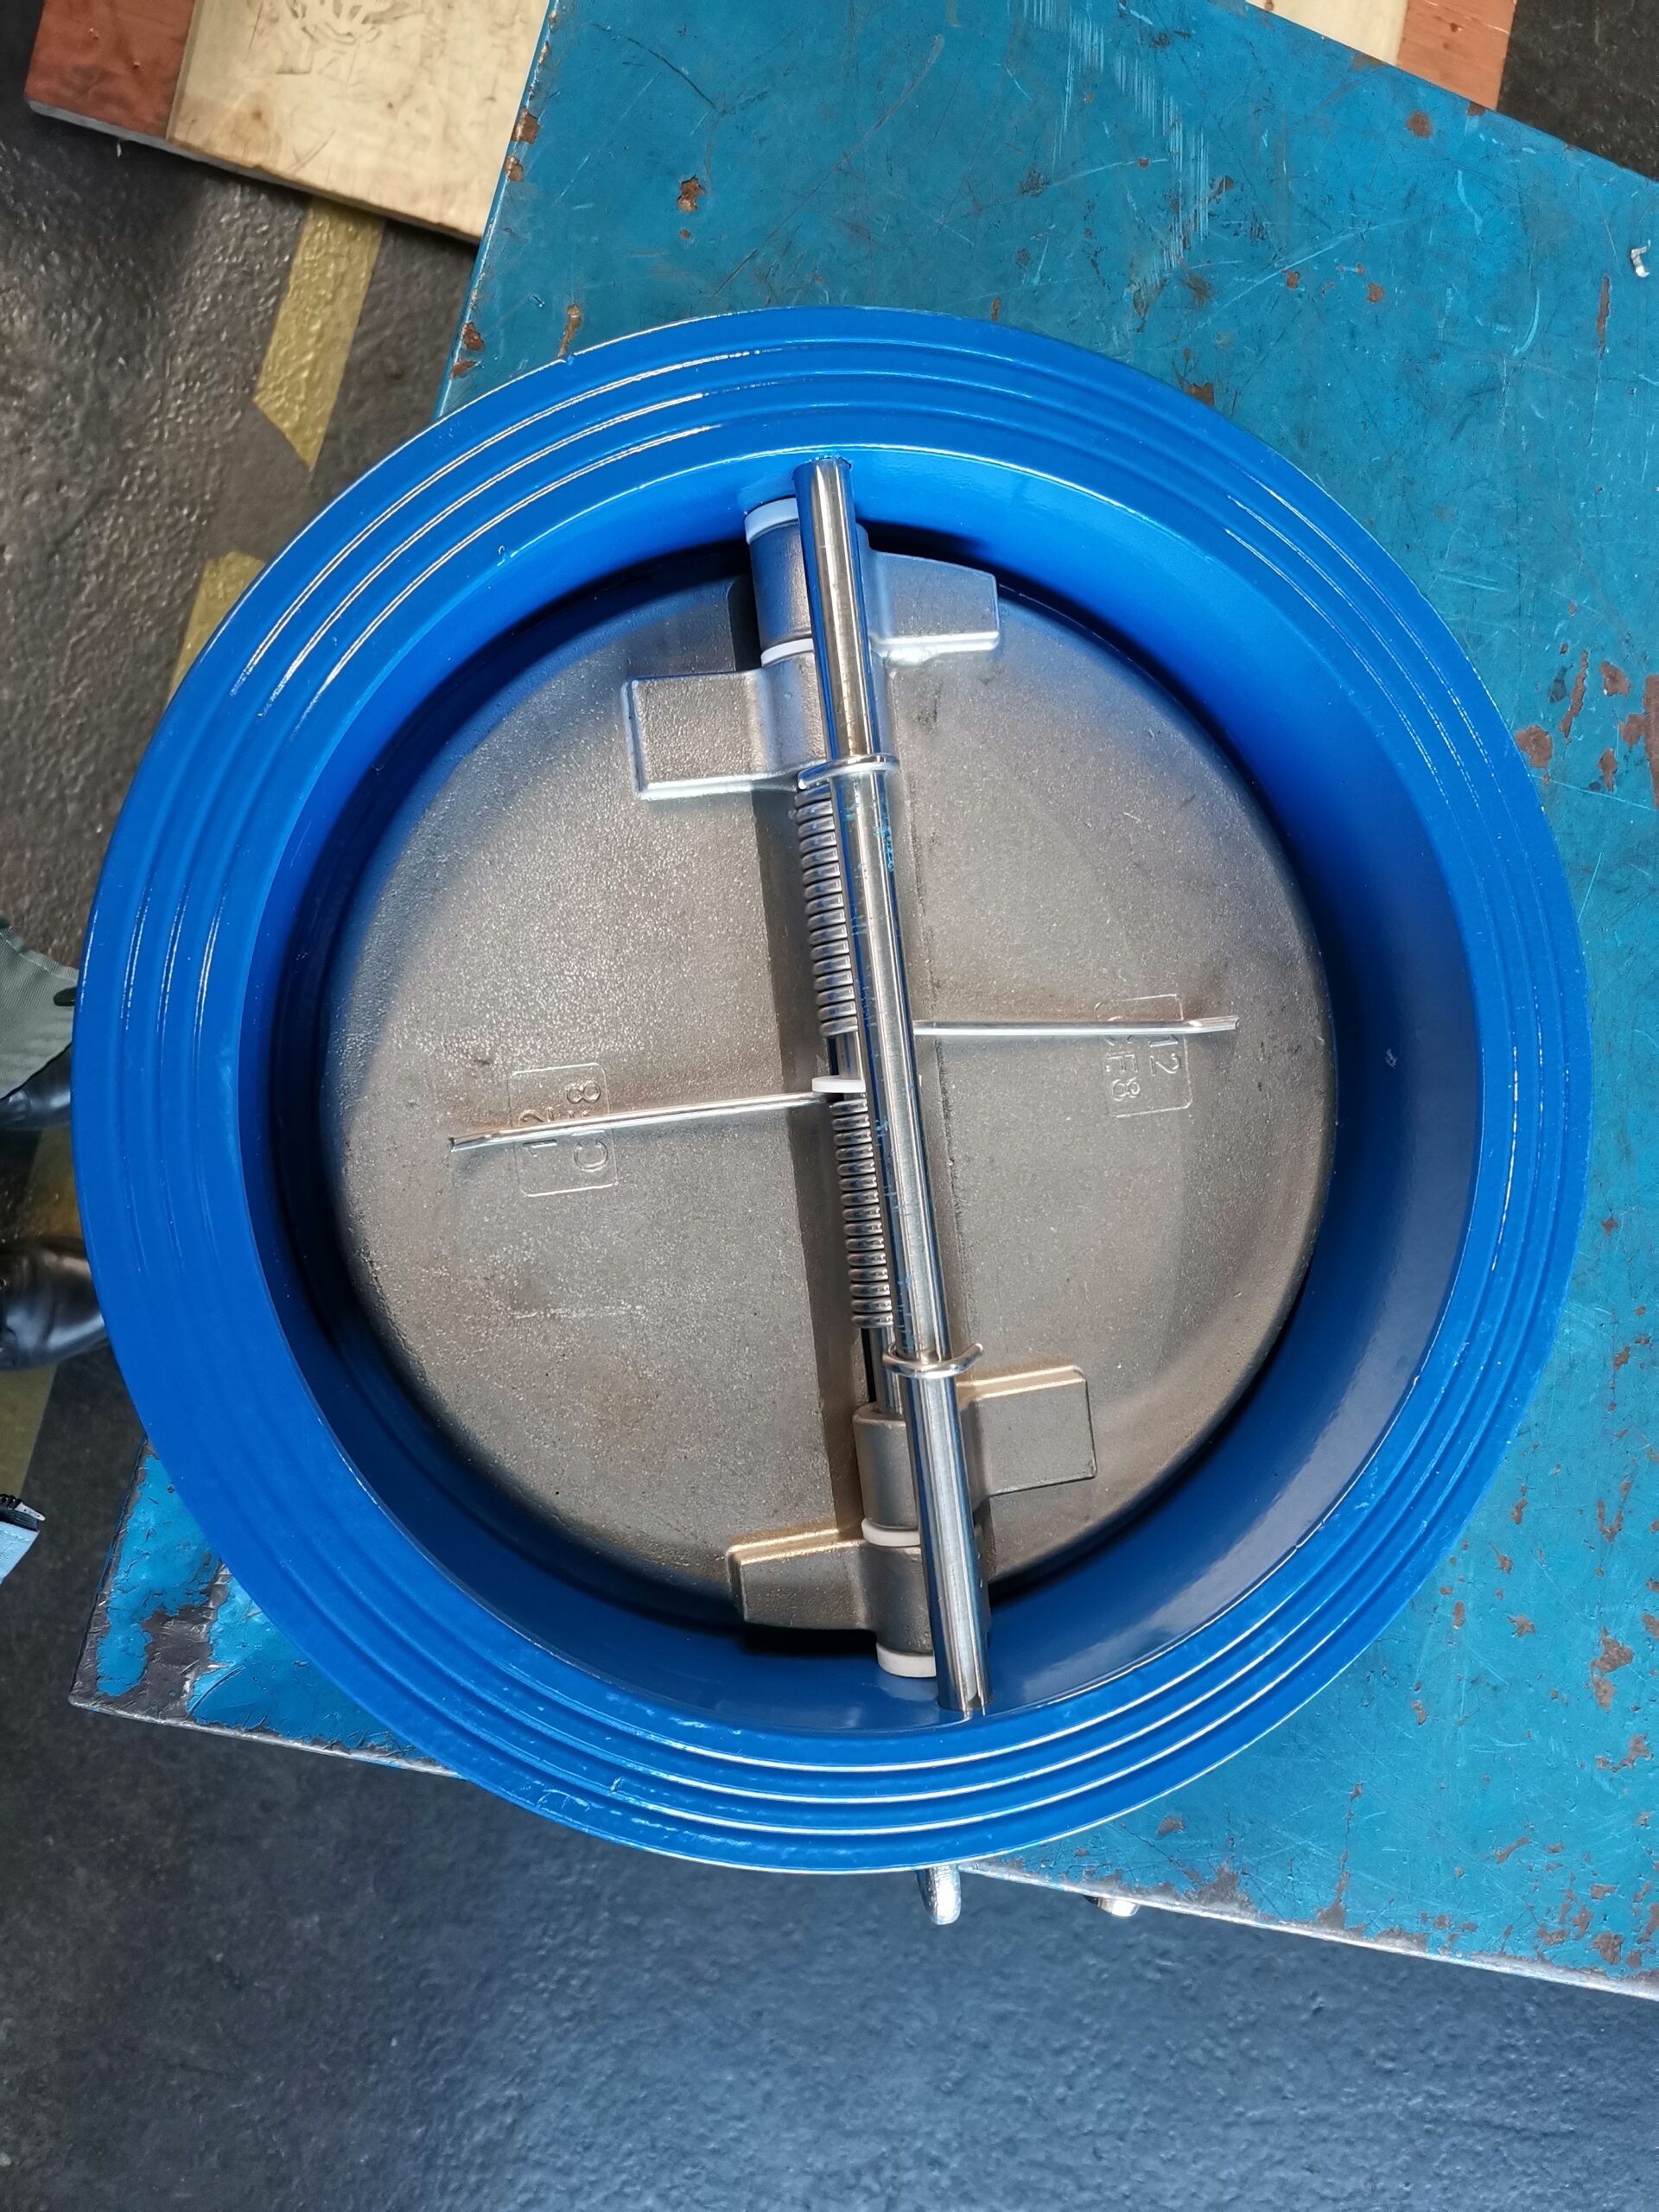 wafer dual plate check valve